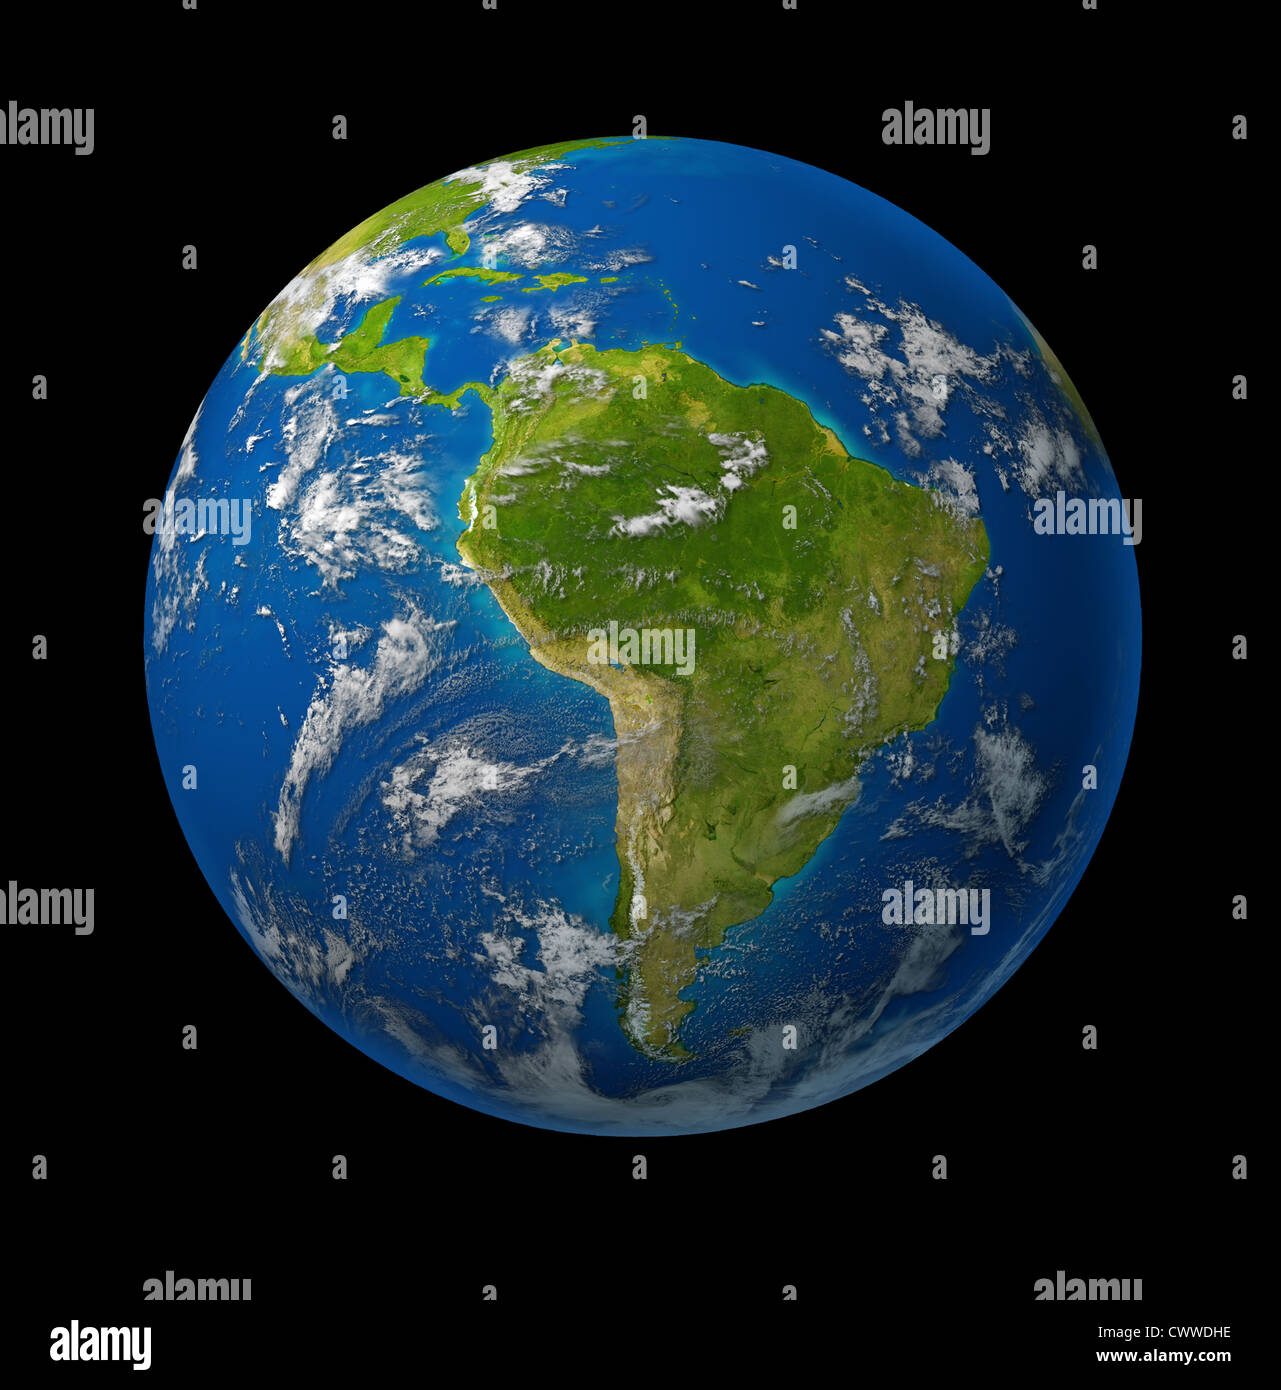 South America earth globe planet on black space background featuring america and latin american countries surrounded by blue ocean and clouds. Stock Photo